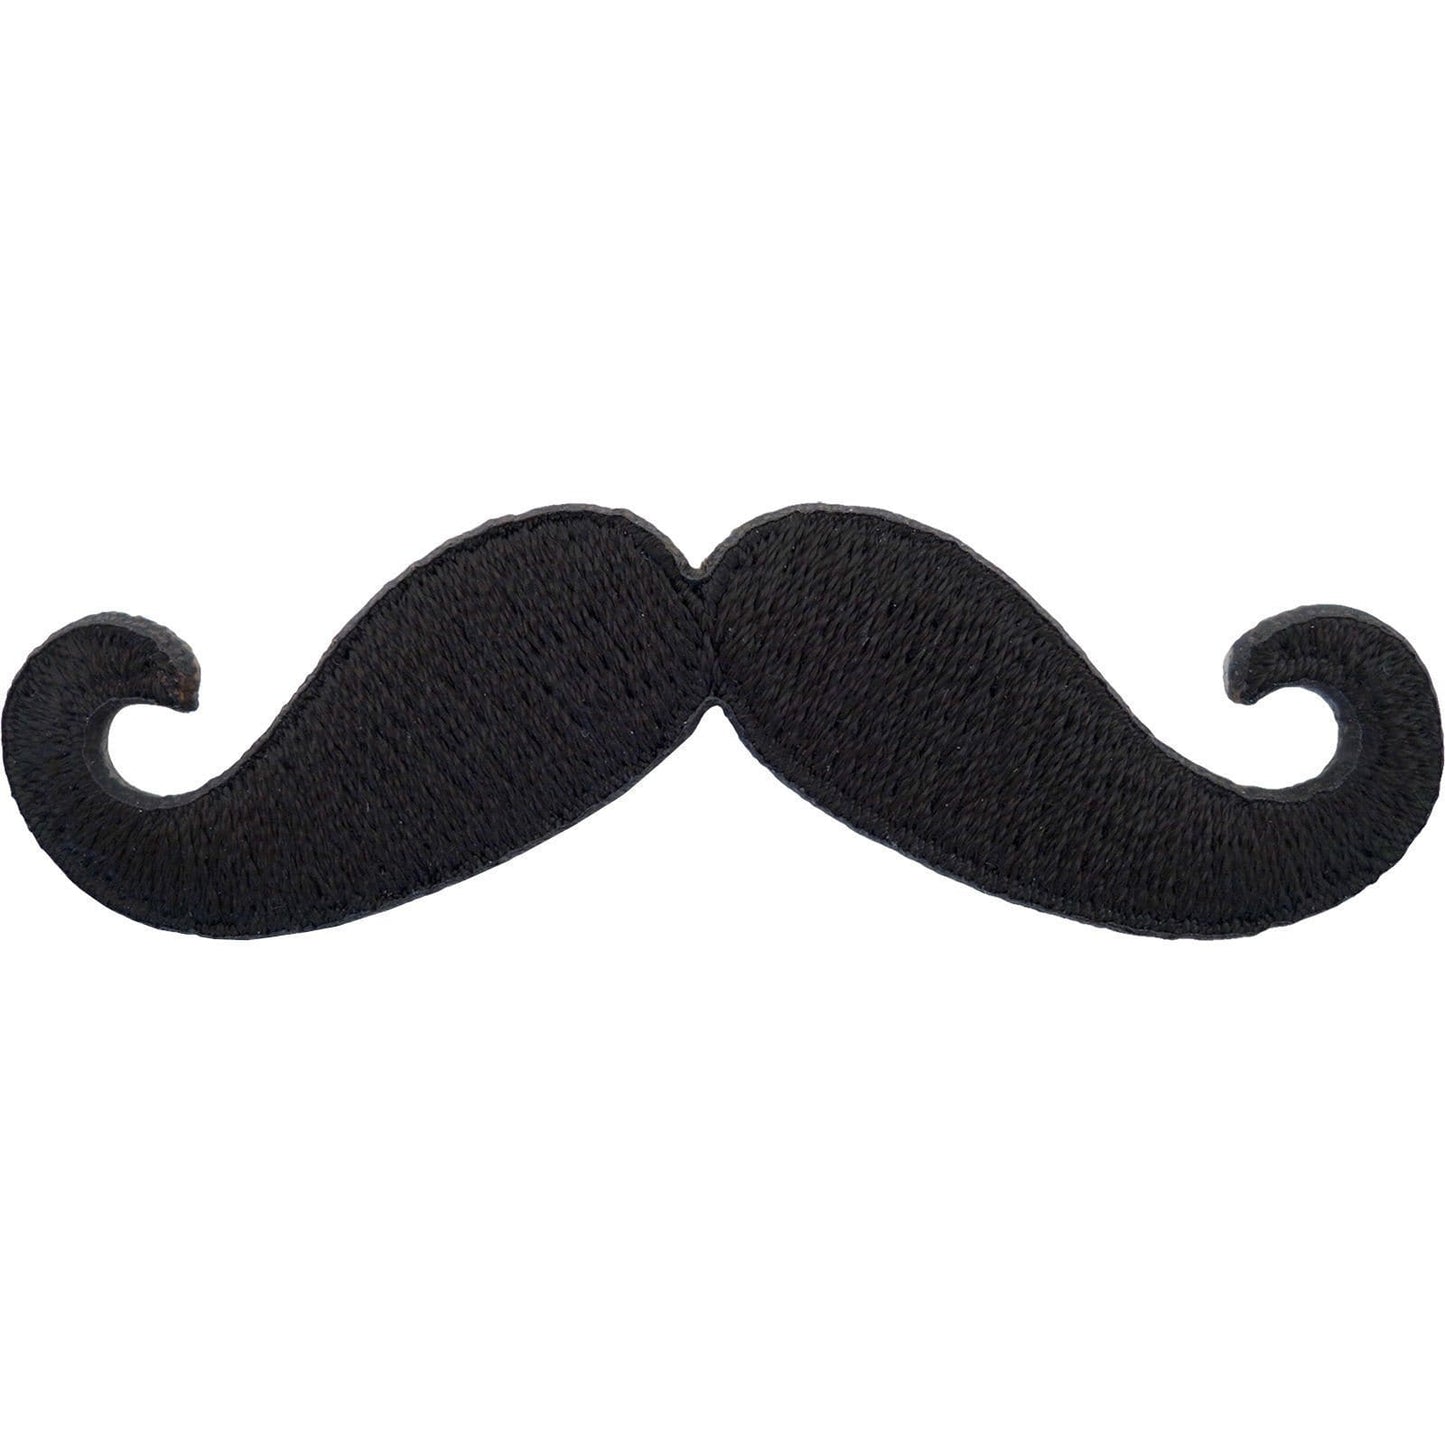 Moustache Iron On Badge Sew On Patch Black Embroidered Monopoly Mustache Motif